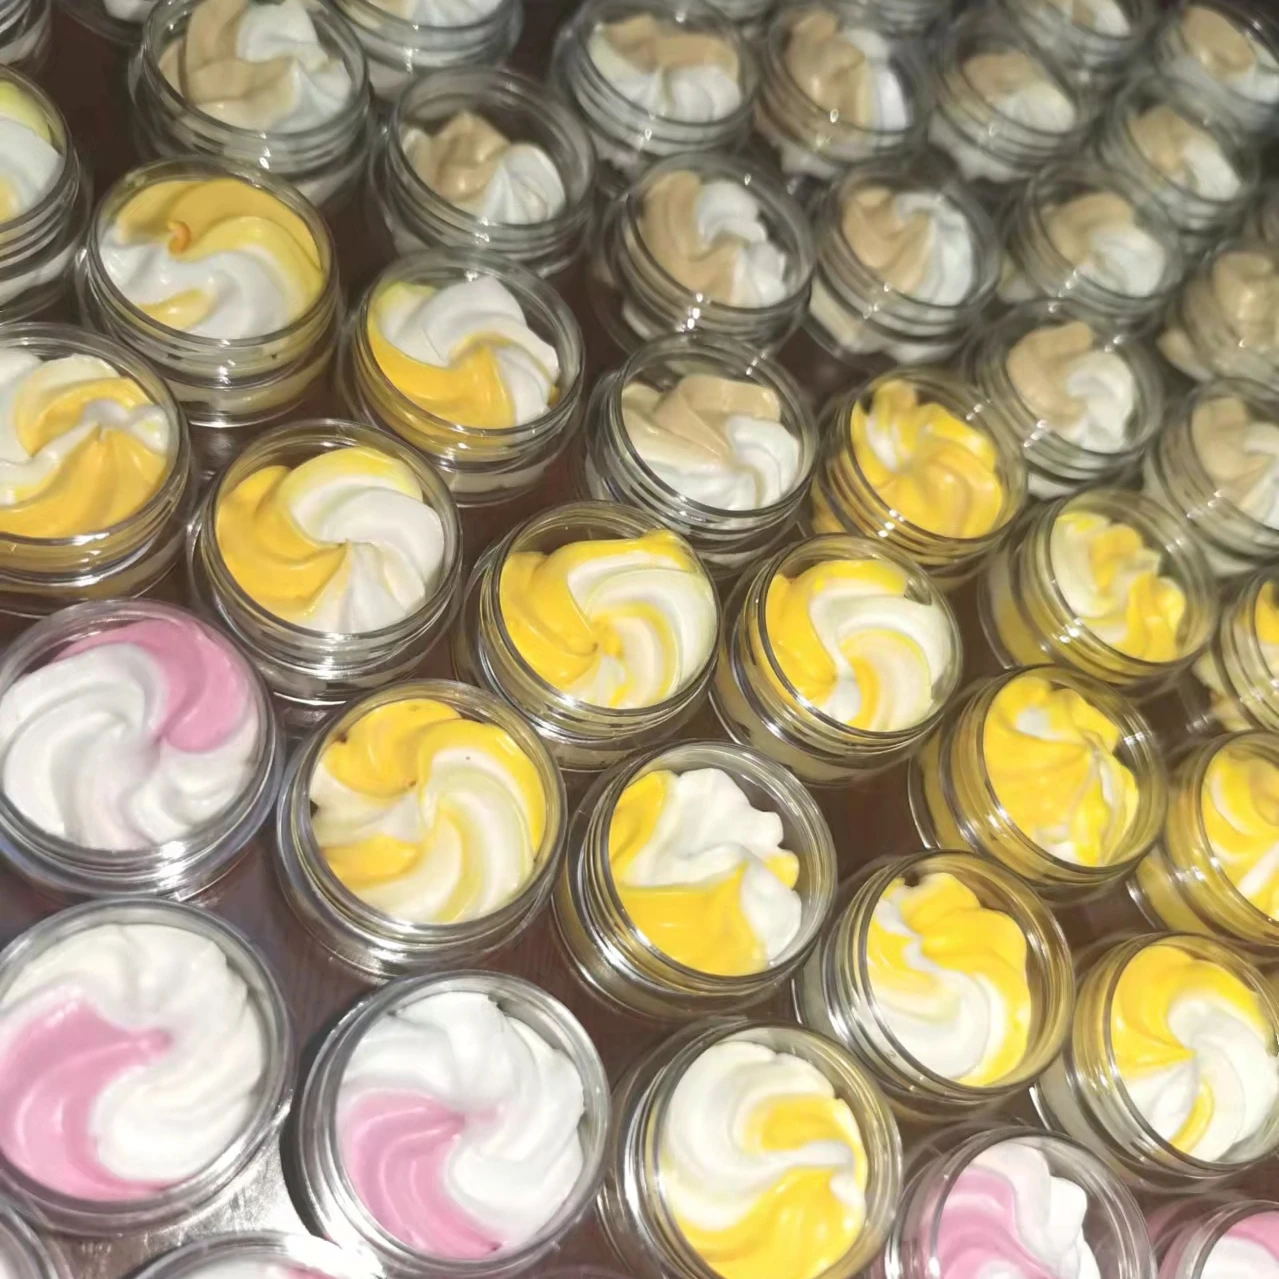 

Free Sample Wholesales Private Label Body Lotion OEM Body Butter Organic Shea Butter Whipped Butter with a Nice Jars Container